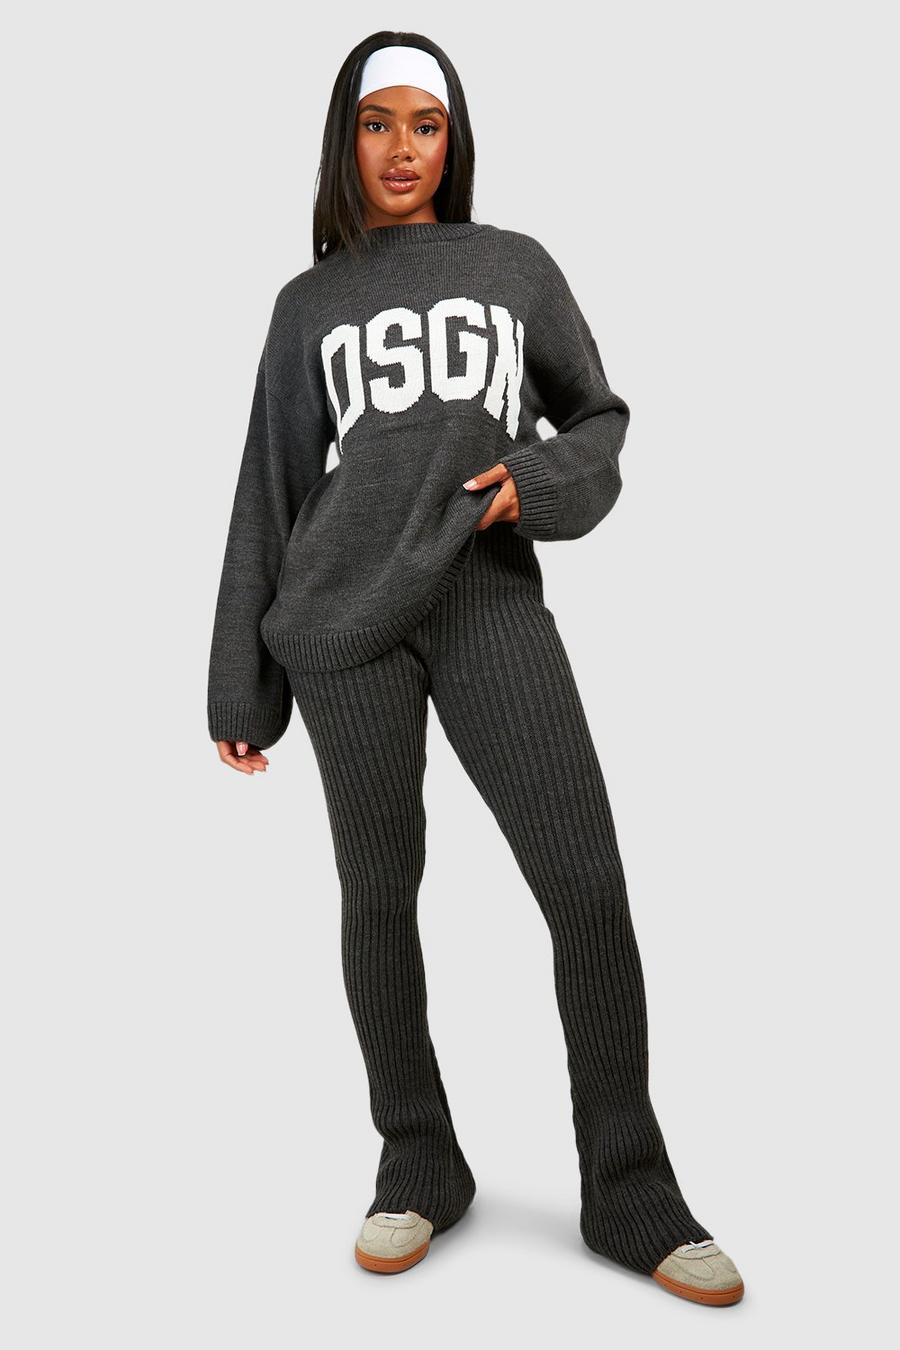 Charcoal grey Dsgn Crew Neck Knitted Jumper And Flare Legging Set